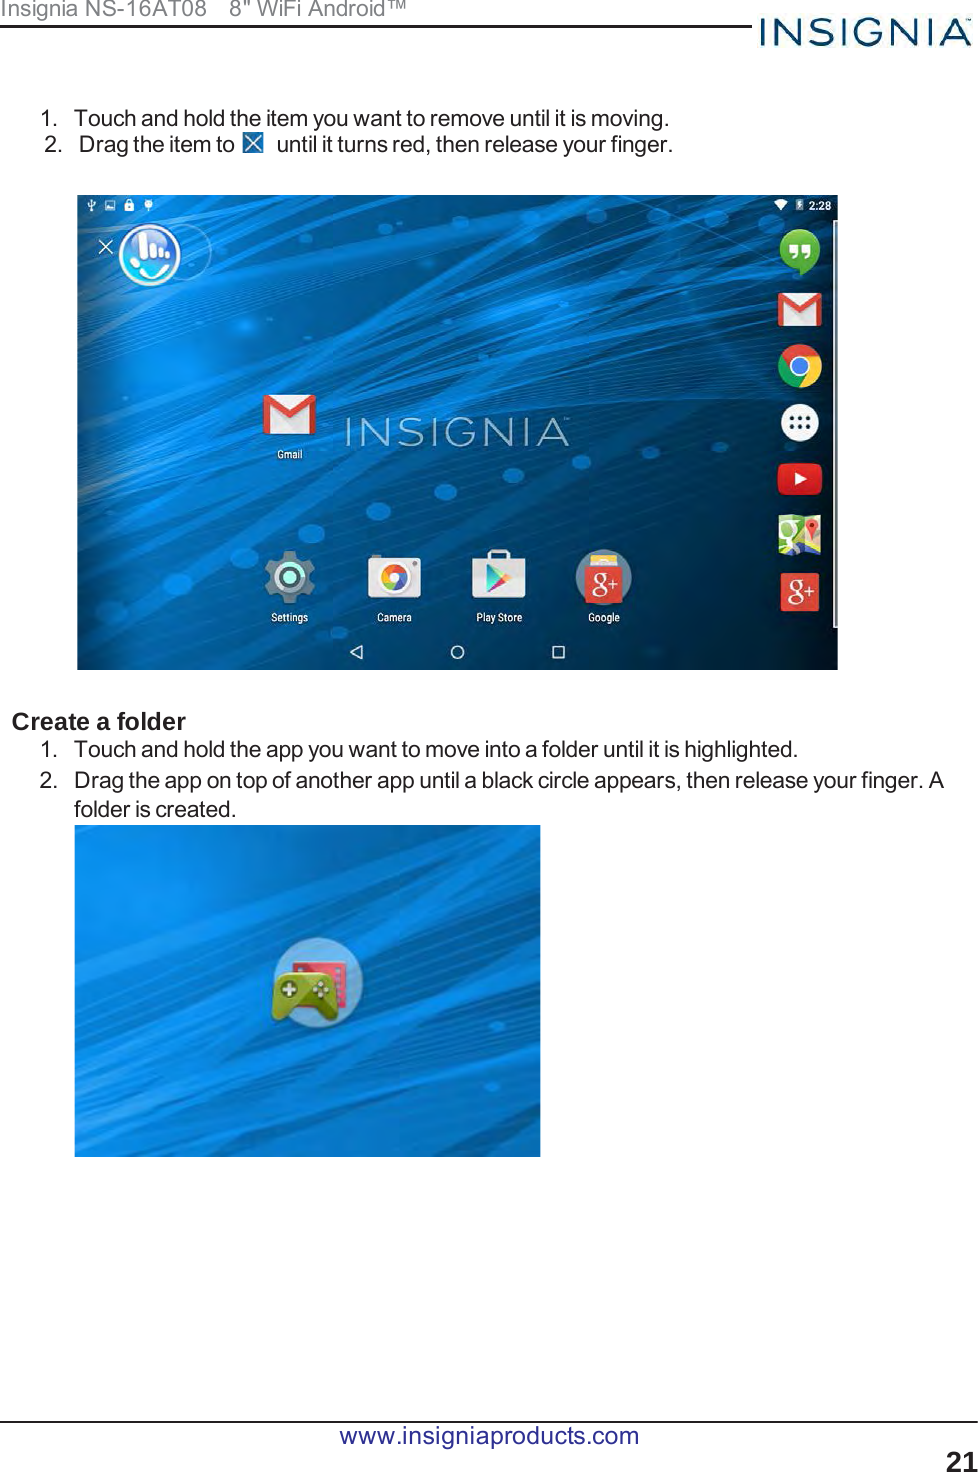 Insignia NS-16AT08   8&quot; WiFi Android™       1.  Touch and hold the item you want to remove until it is moving. 2.  Drag the item to   until it turns red, then release your finger.     Create a folder 1.  Touch and hold the app you want to move into a folder until it is highlighted. 2.  Drag the app on top of another app until a black circle appears, then release your finger. A folder is created.  www.insigniaproducts.com 21  